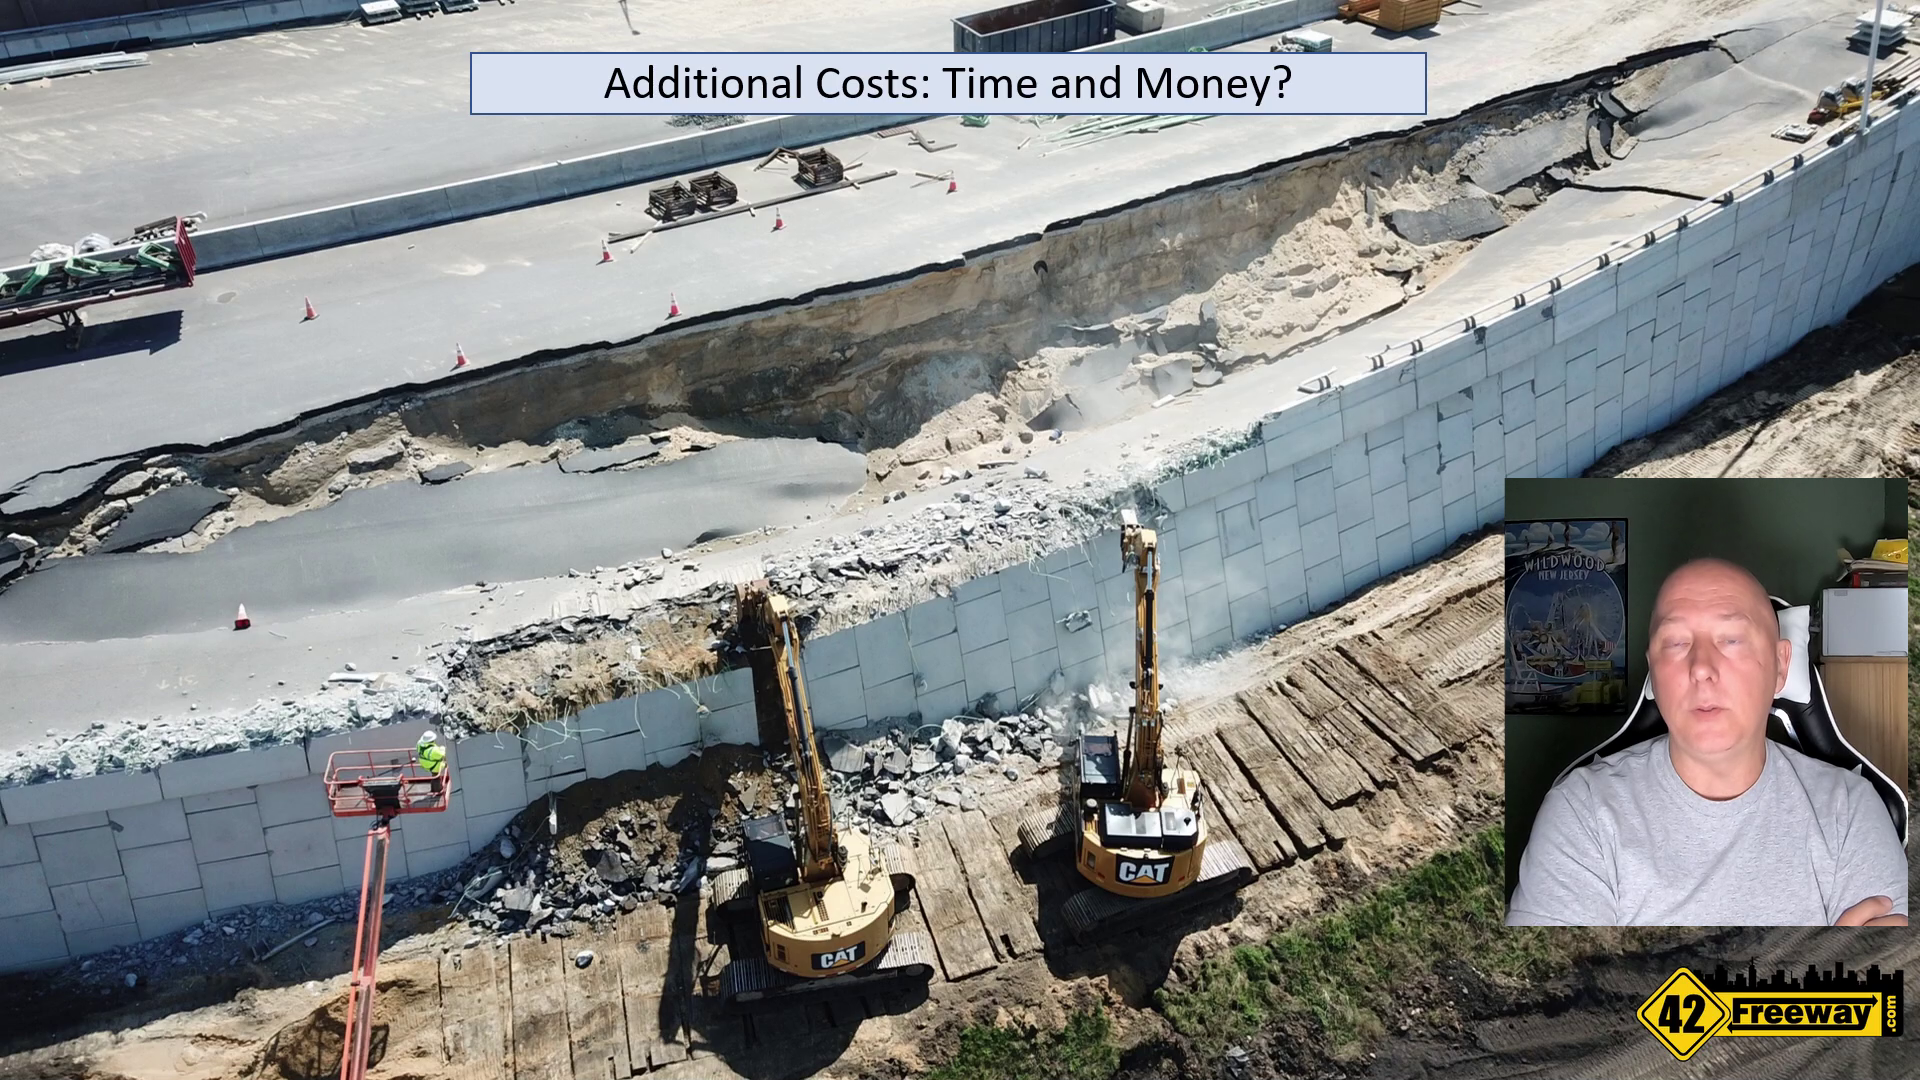 New Direct Connect Video Update Njdot Project Update This Wednesday Register Online More Drone 42 Freeway